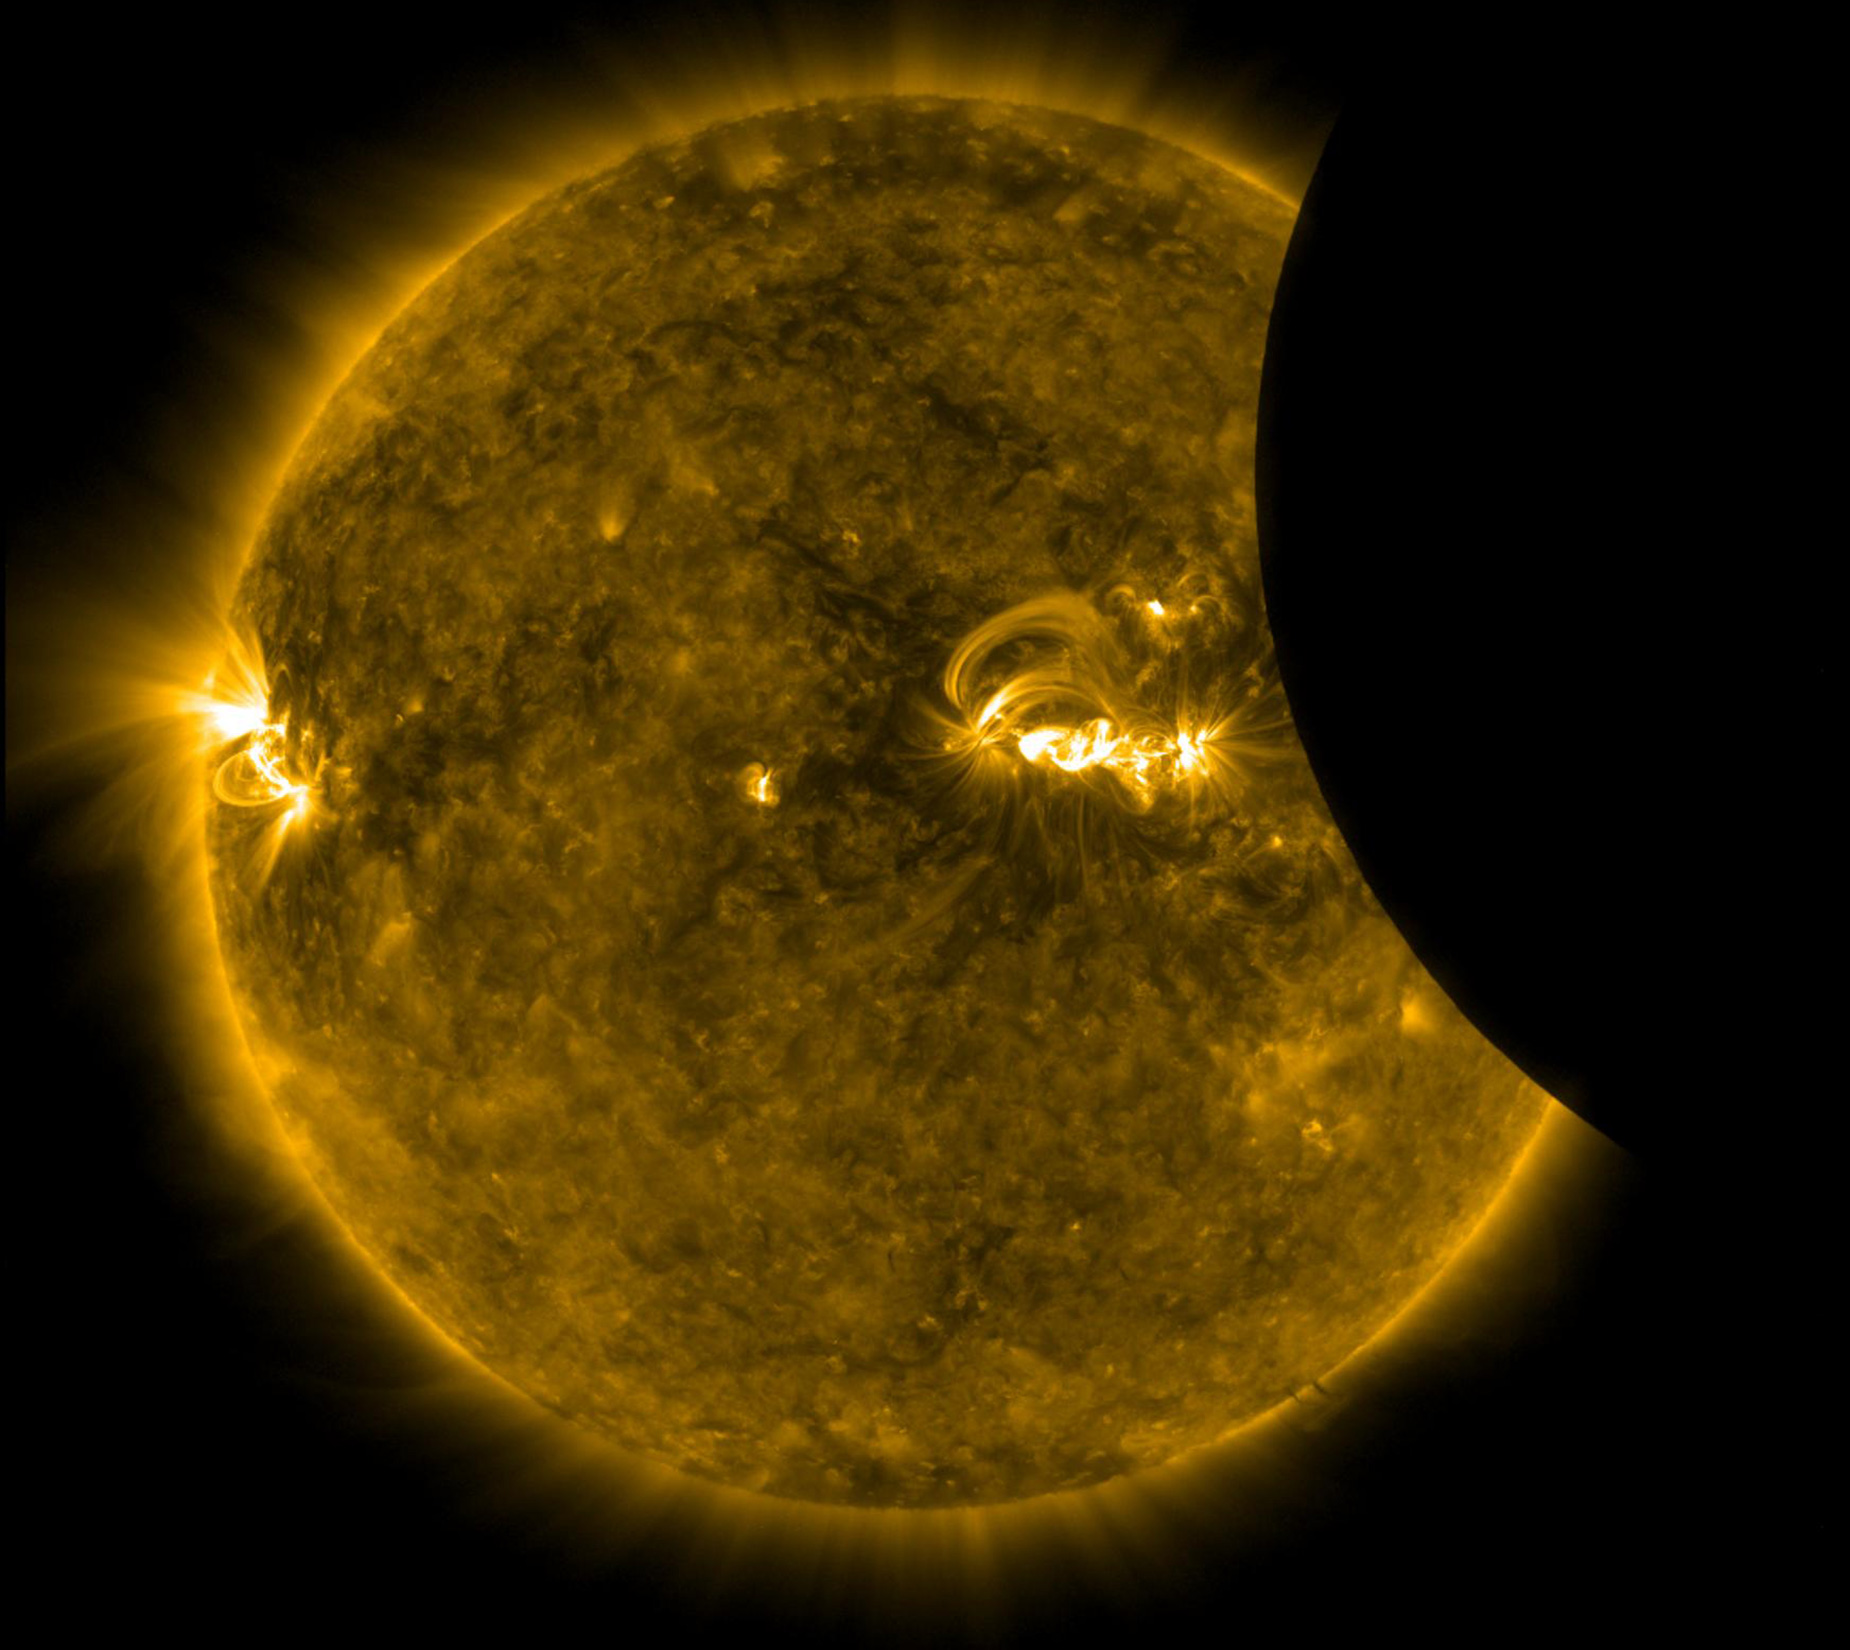 NASA's SDO spacecraft captured details of the sun during the partial eclipse on August 21, 2017.